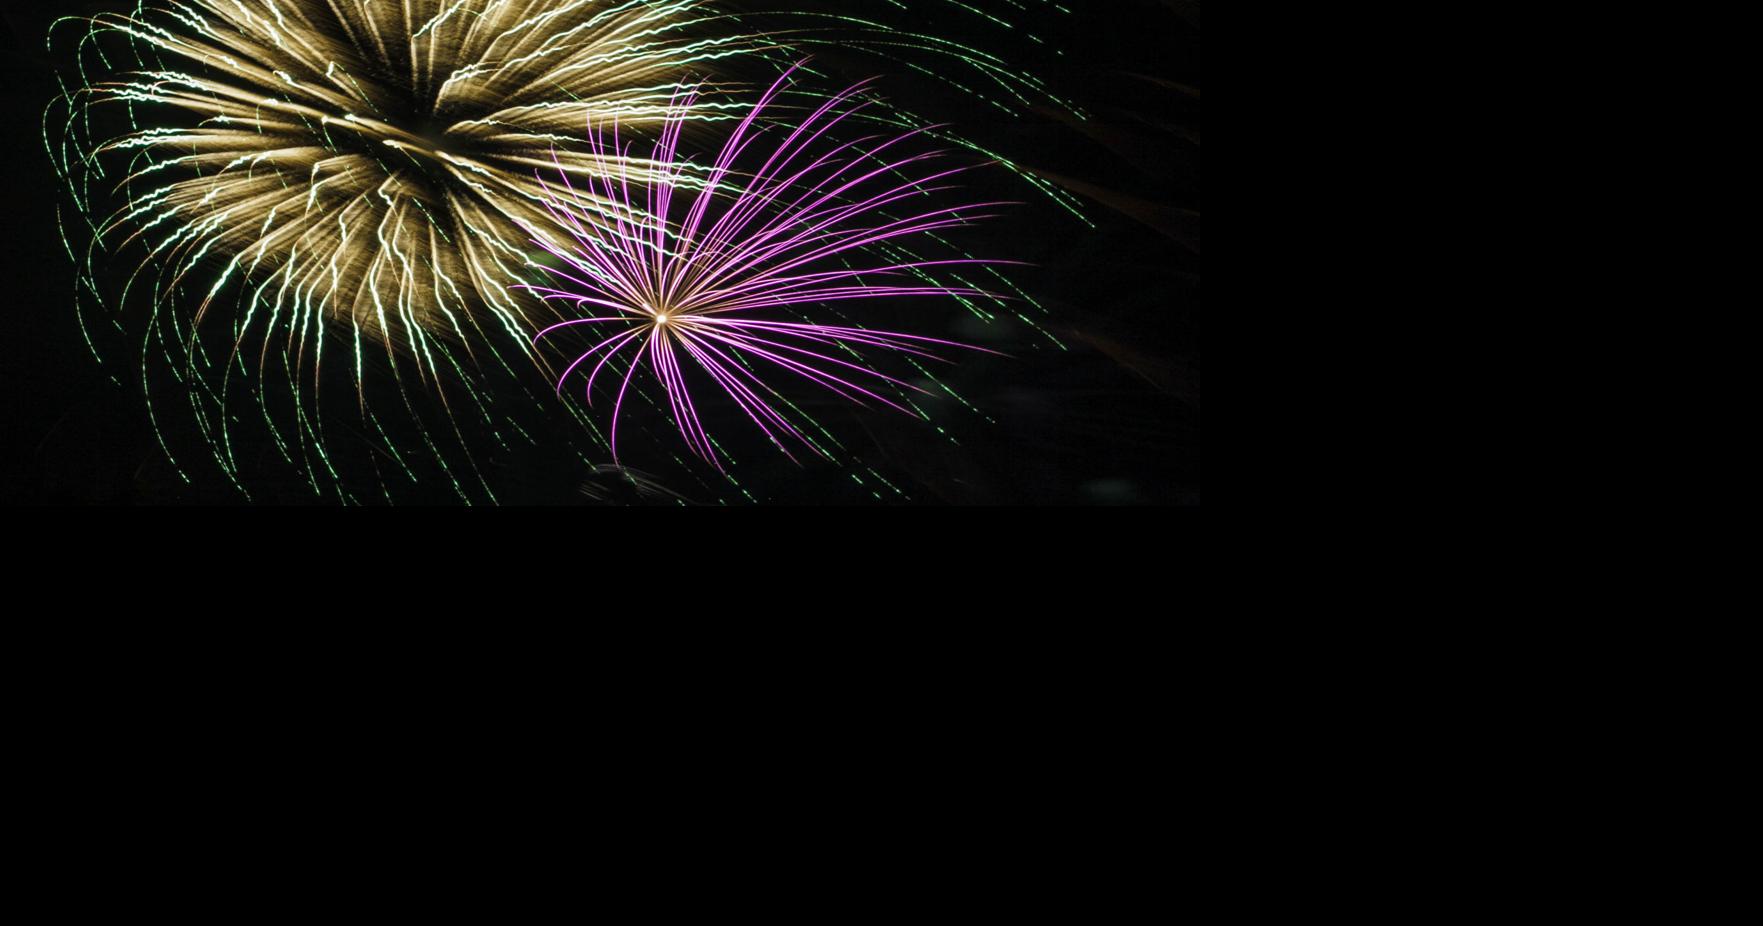 Longview announces fireworks hours, safety advice